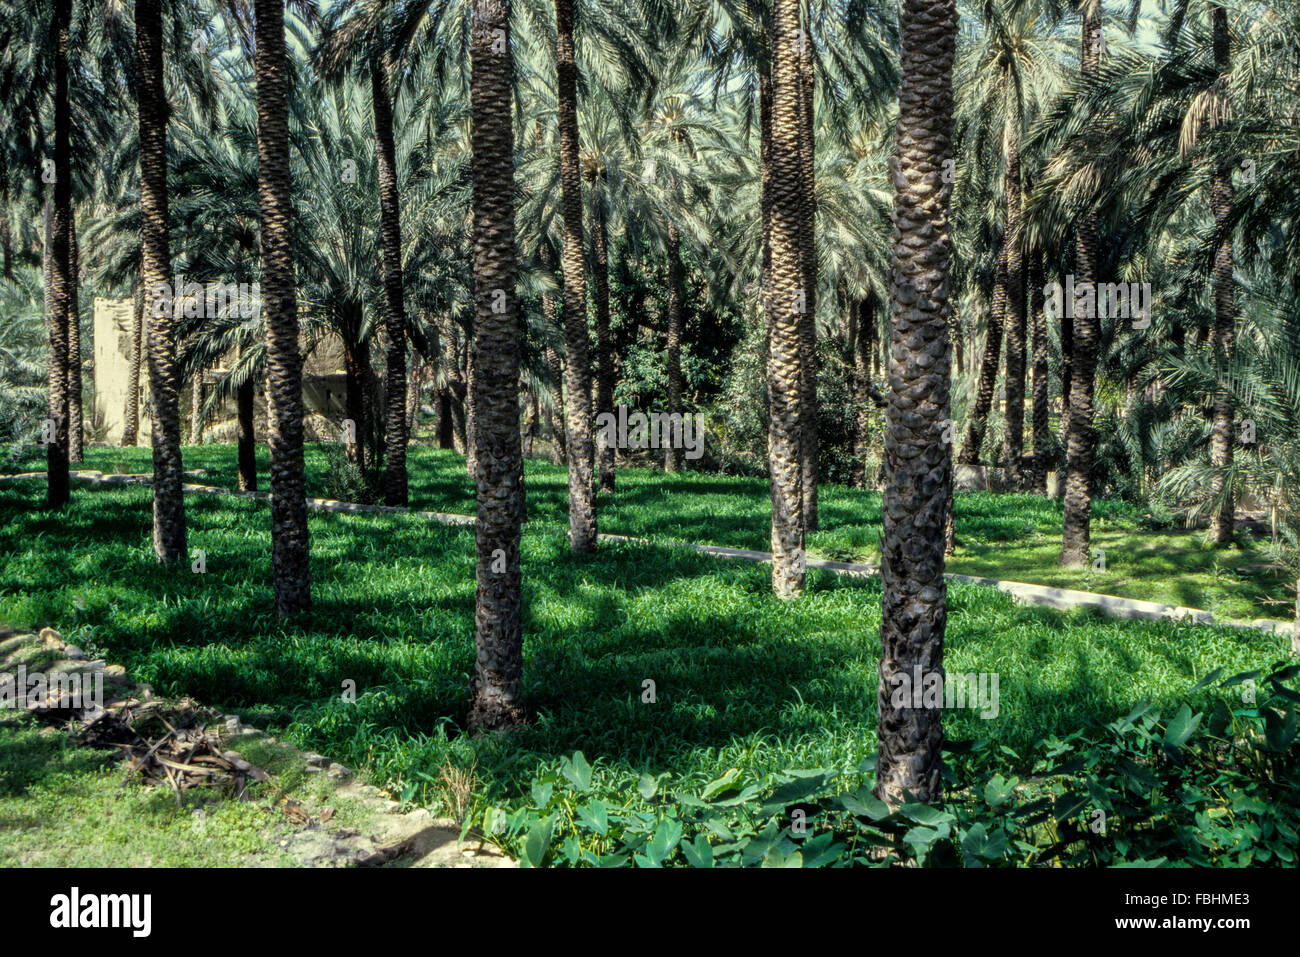 Nakhl, Oman.  Inside a Date Garden.  Irrigation channel running across the middle. Stock Photo